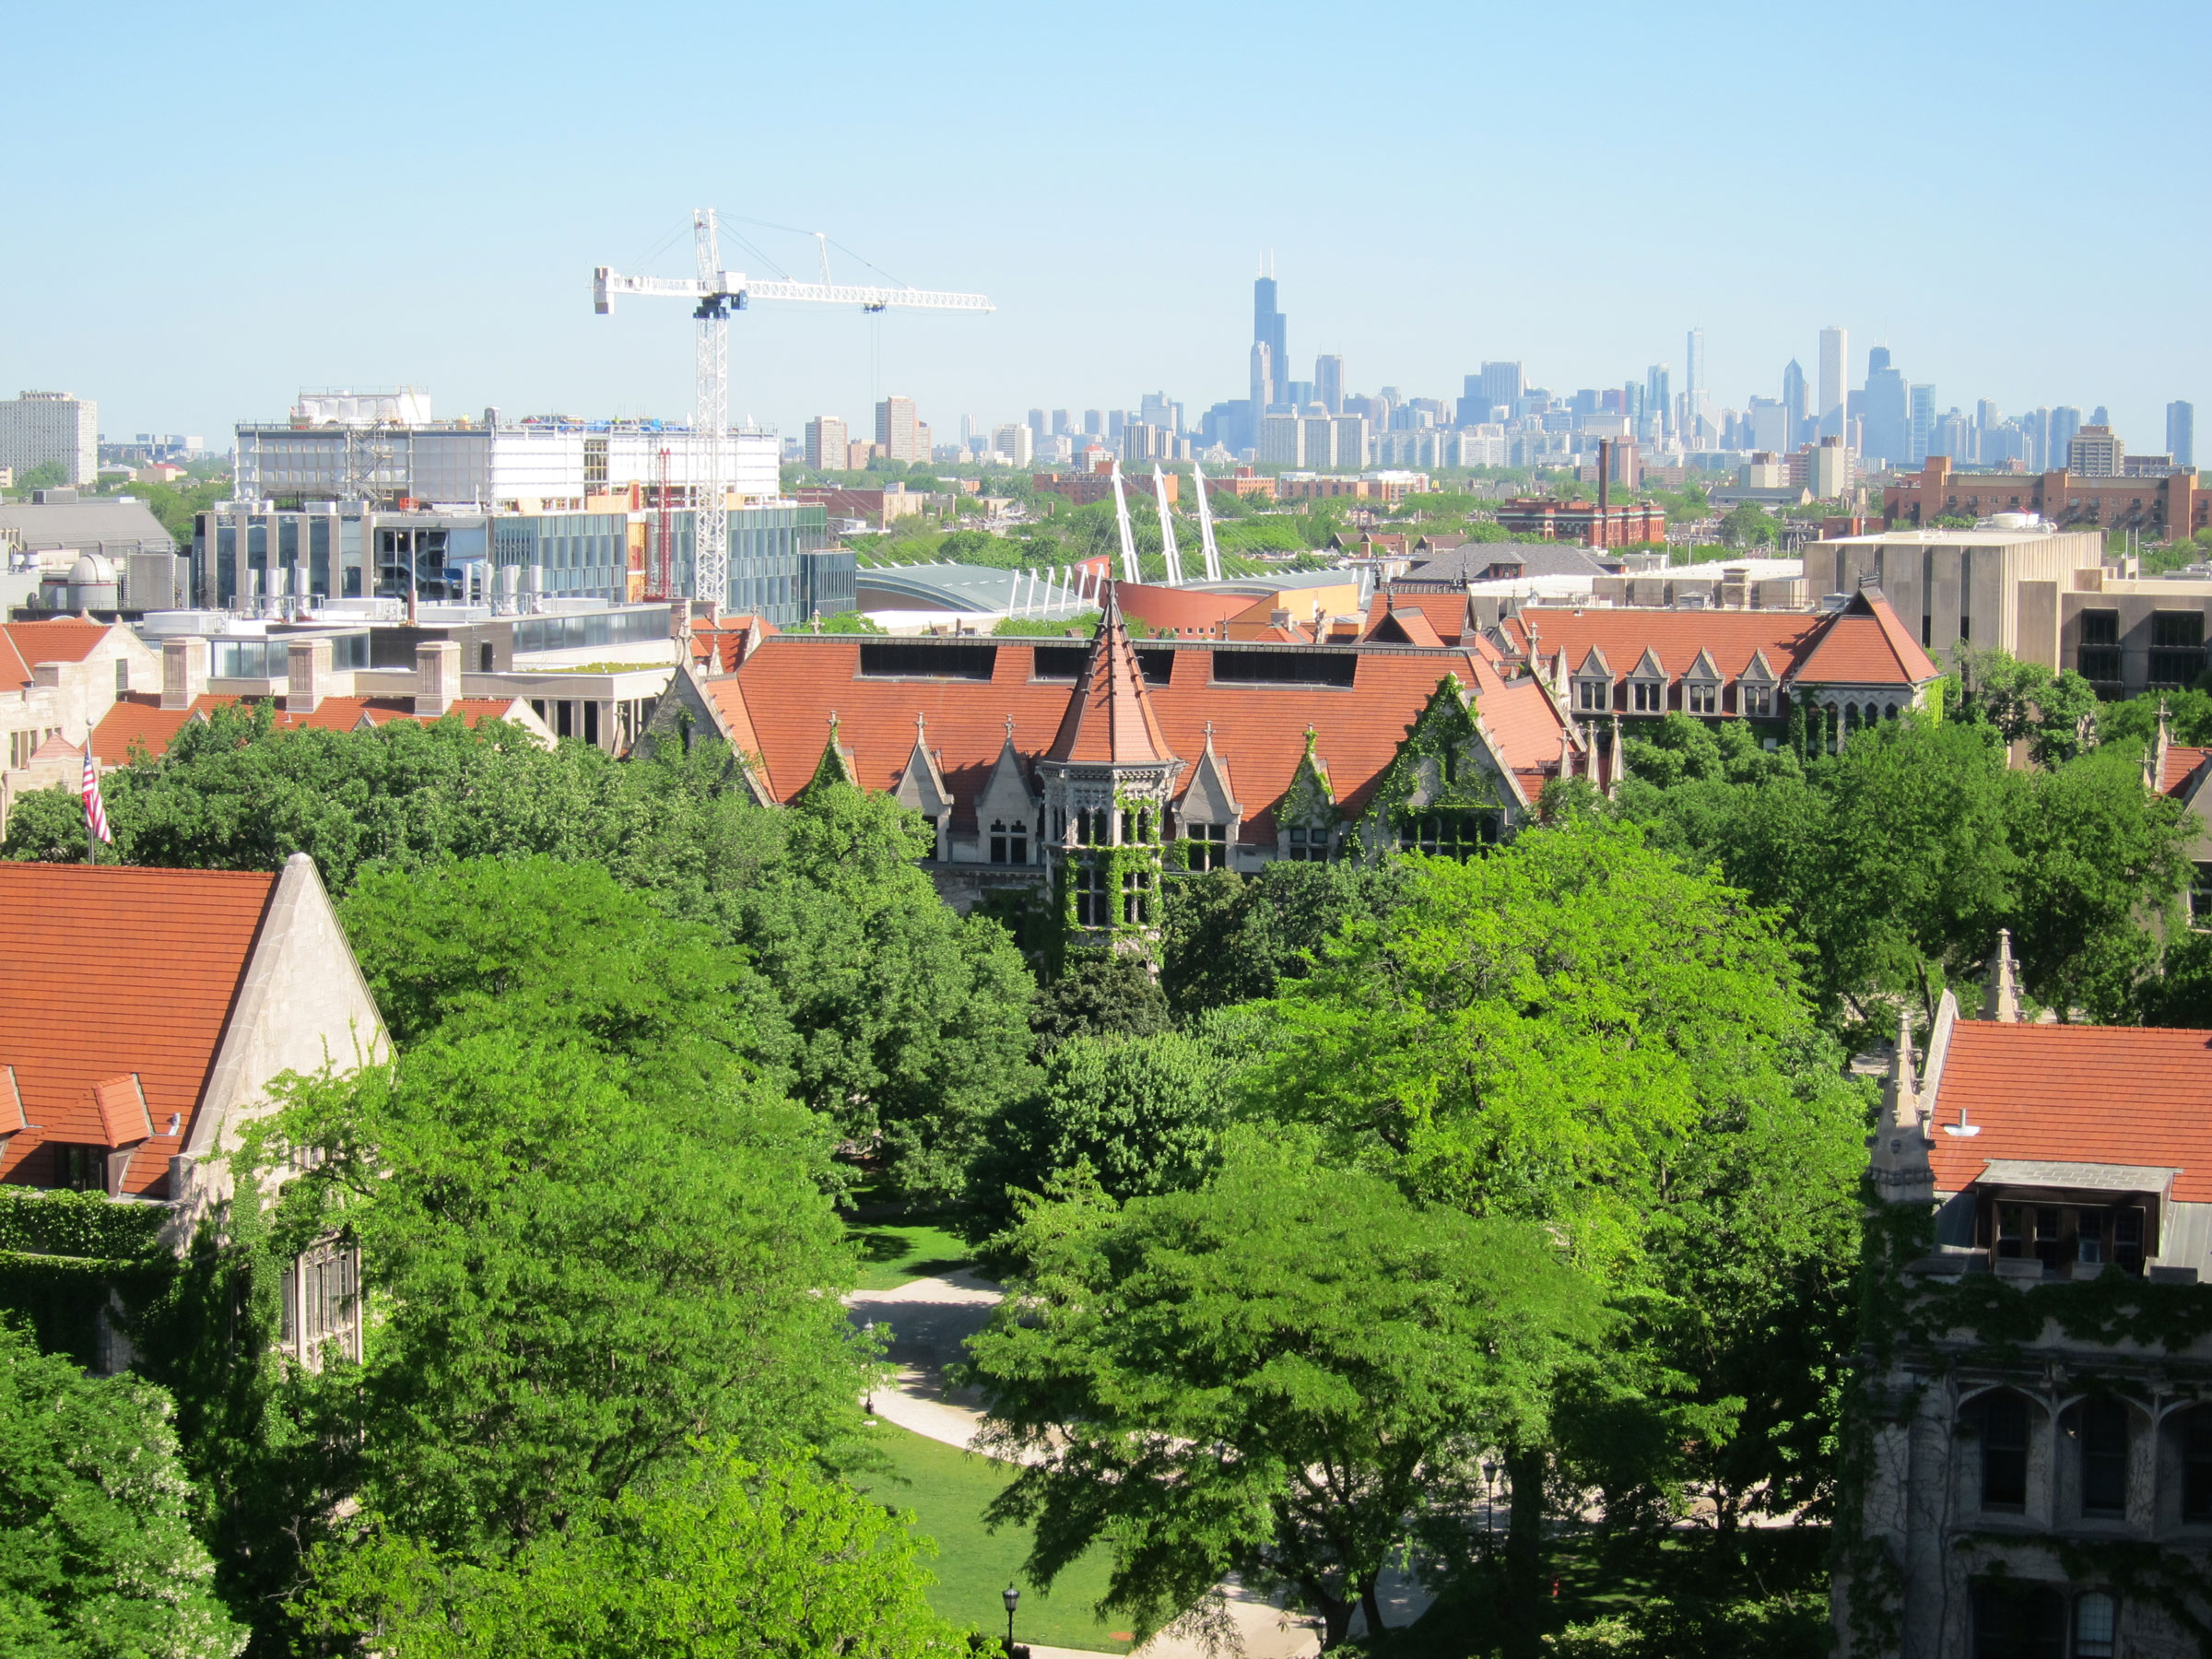 Ludowici Clay Tiles Update the University of Chicago’s Iconic Red Roofs